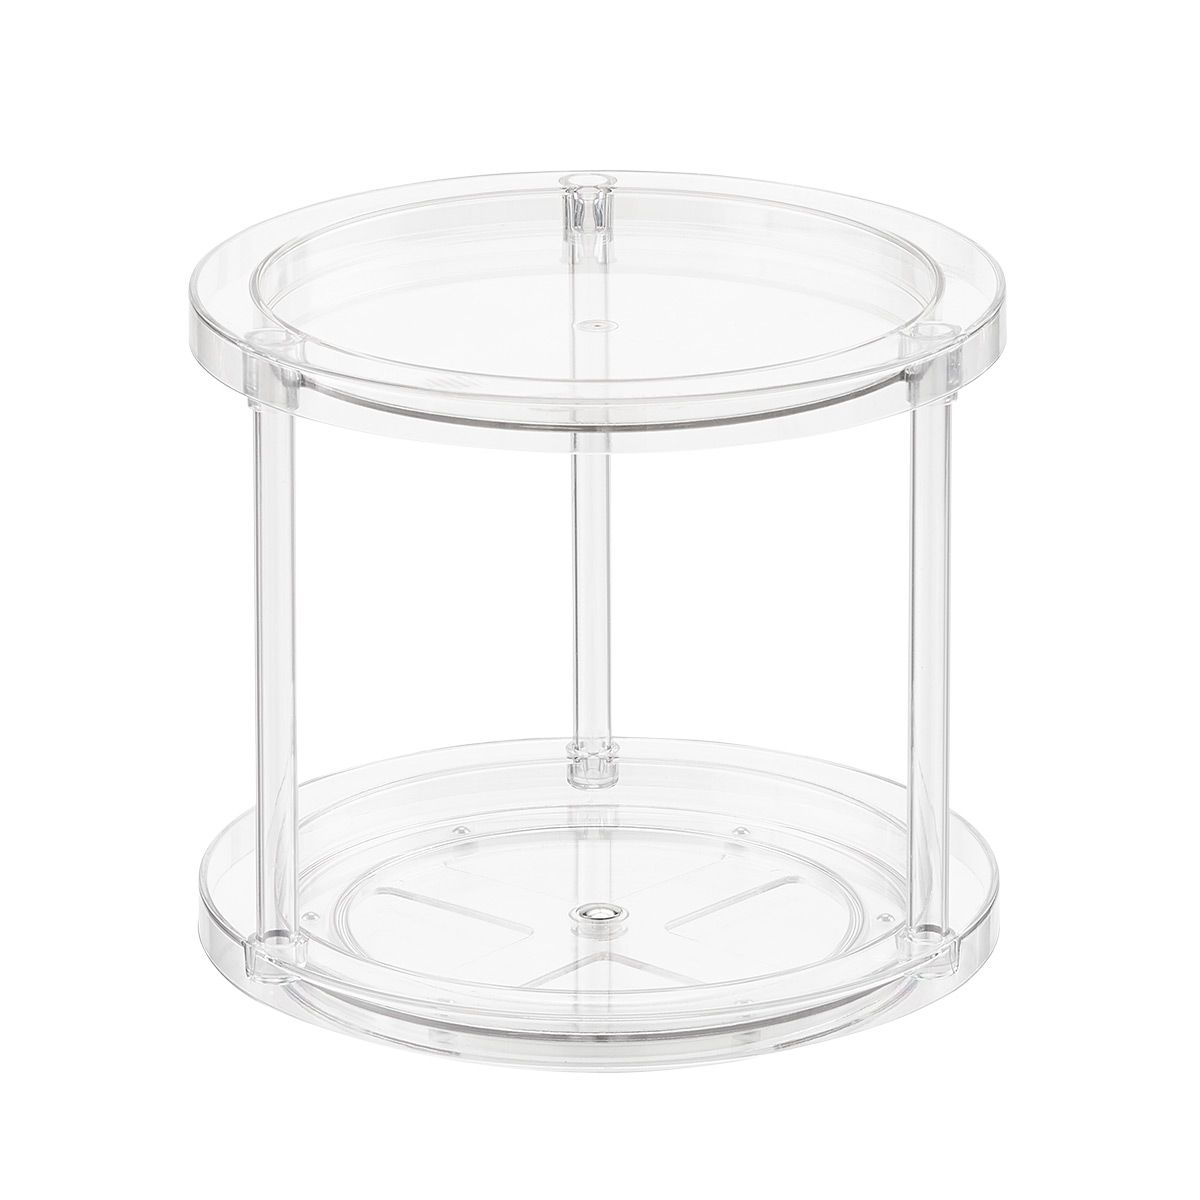 T.H.E. 2-Tier Turntable | The Container Store